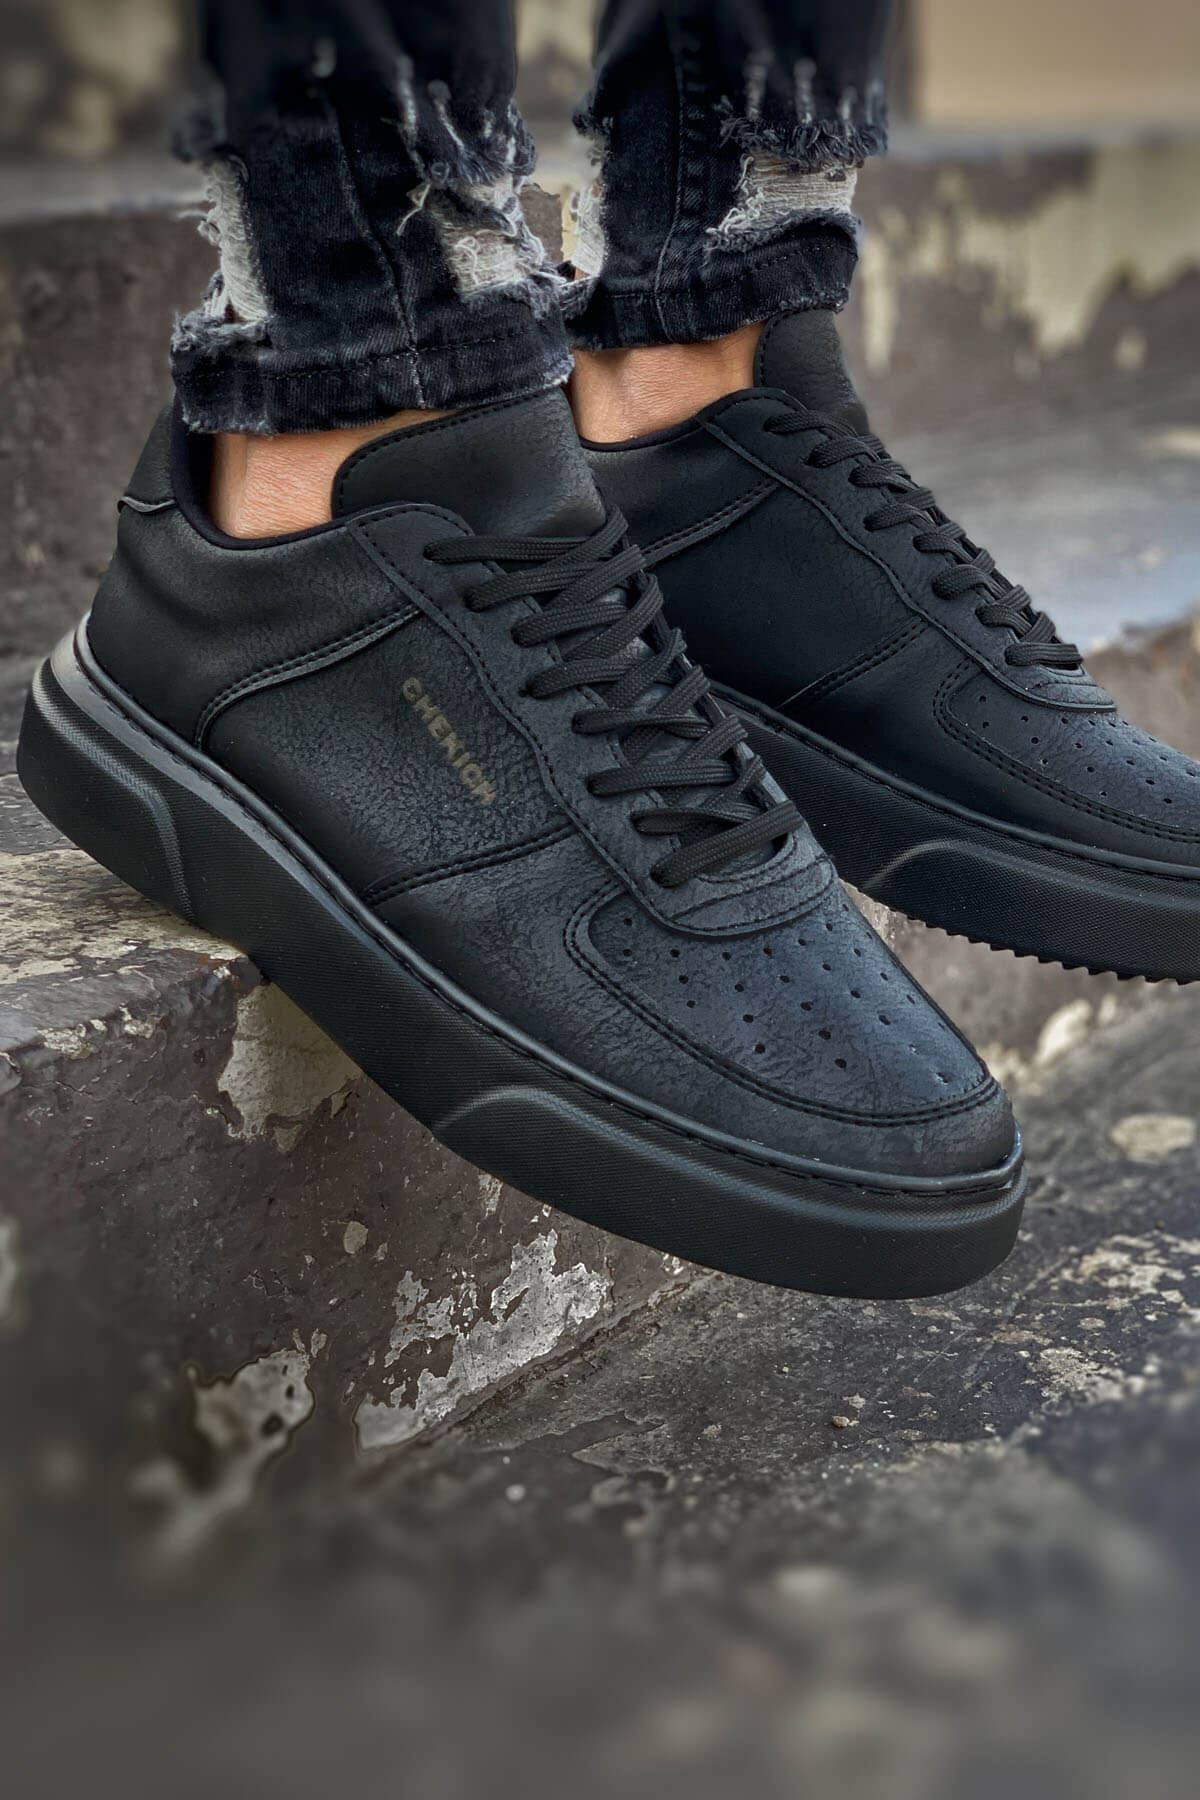 Chekich Men Shoes Black Color Artificial Leather Lace Up Autumn Season Sneakers Casual Comfortable 2021 Trend Daily Office Orthopedic Walking Sportive Air Odorless High School Breathable College White Outsole CH087 V3